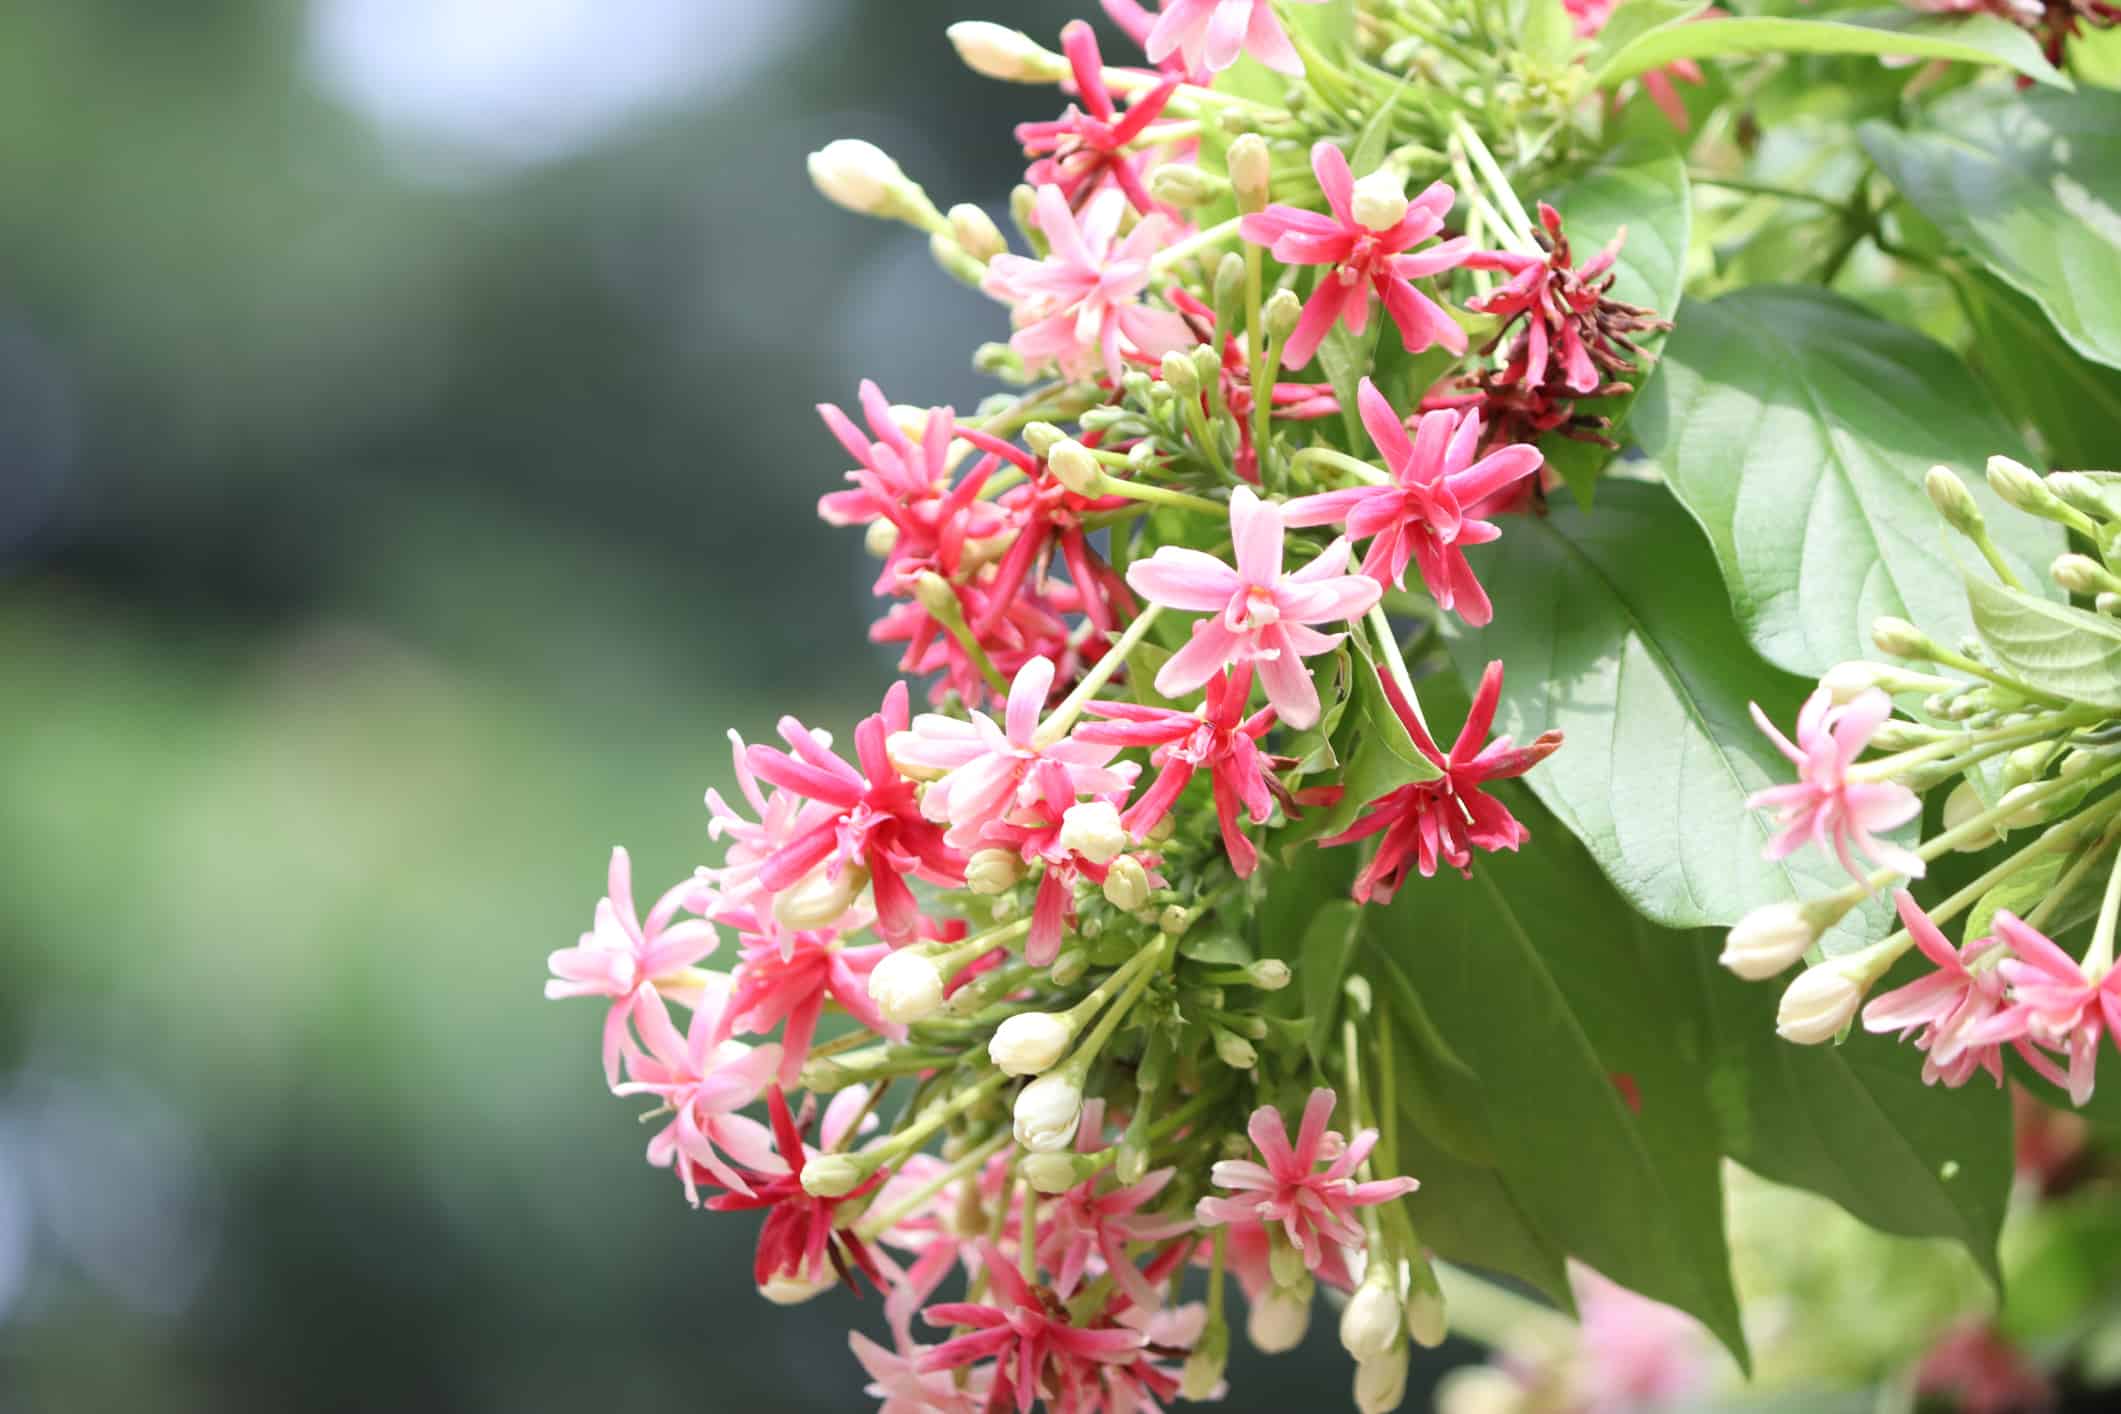 rangoon jasmine, Rangoon jasmine is The trees bend and twist and bloom it is red and pink and rose colors and different types of colors Against the background of green leaves it is beautiful natural flower